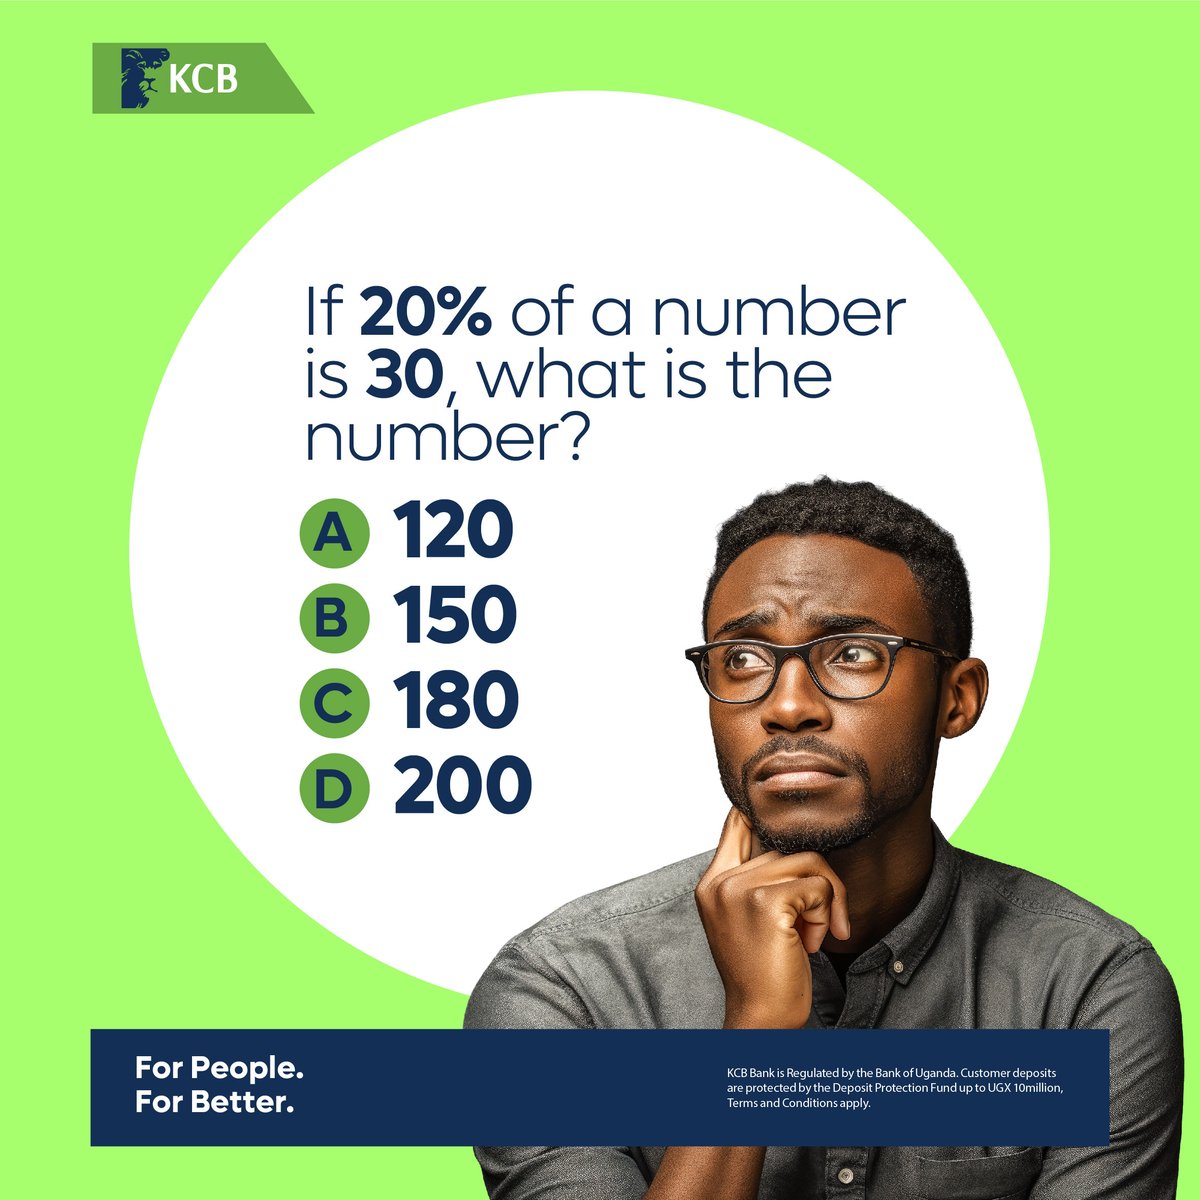 Let's see how well you remember your maths sessions. #ForPeopleForBetter #KCBGames